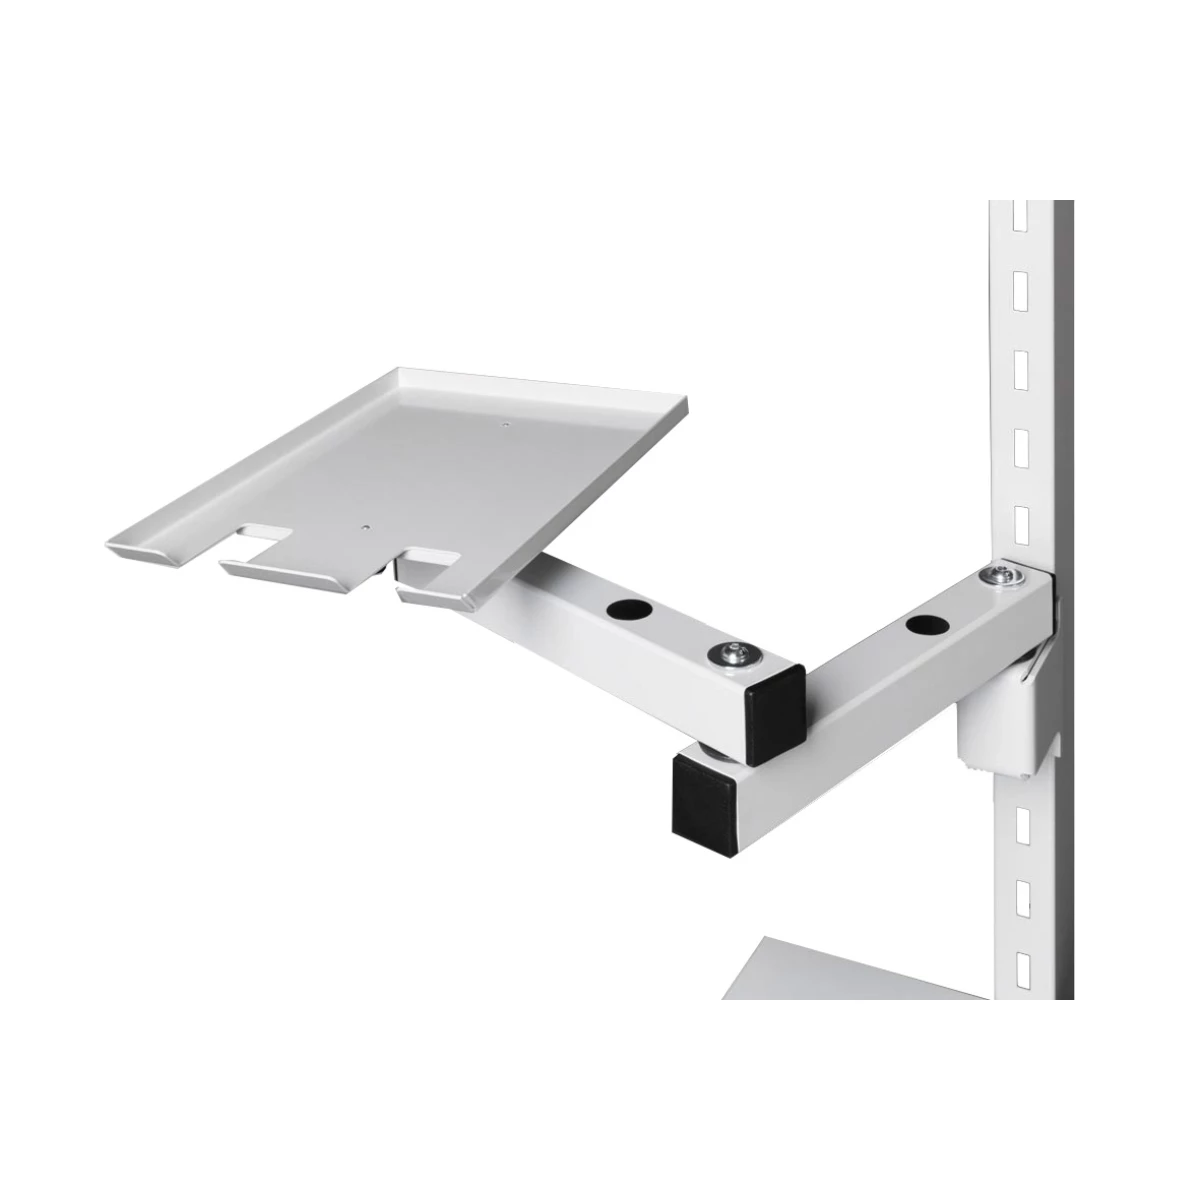 Swivel and height adjustable shelf for ESD packing table